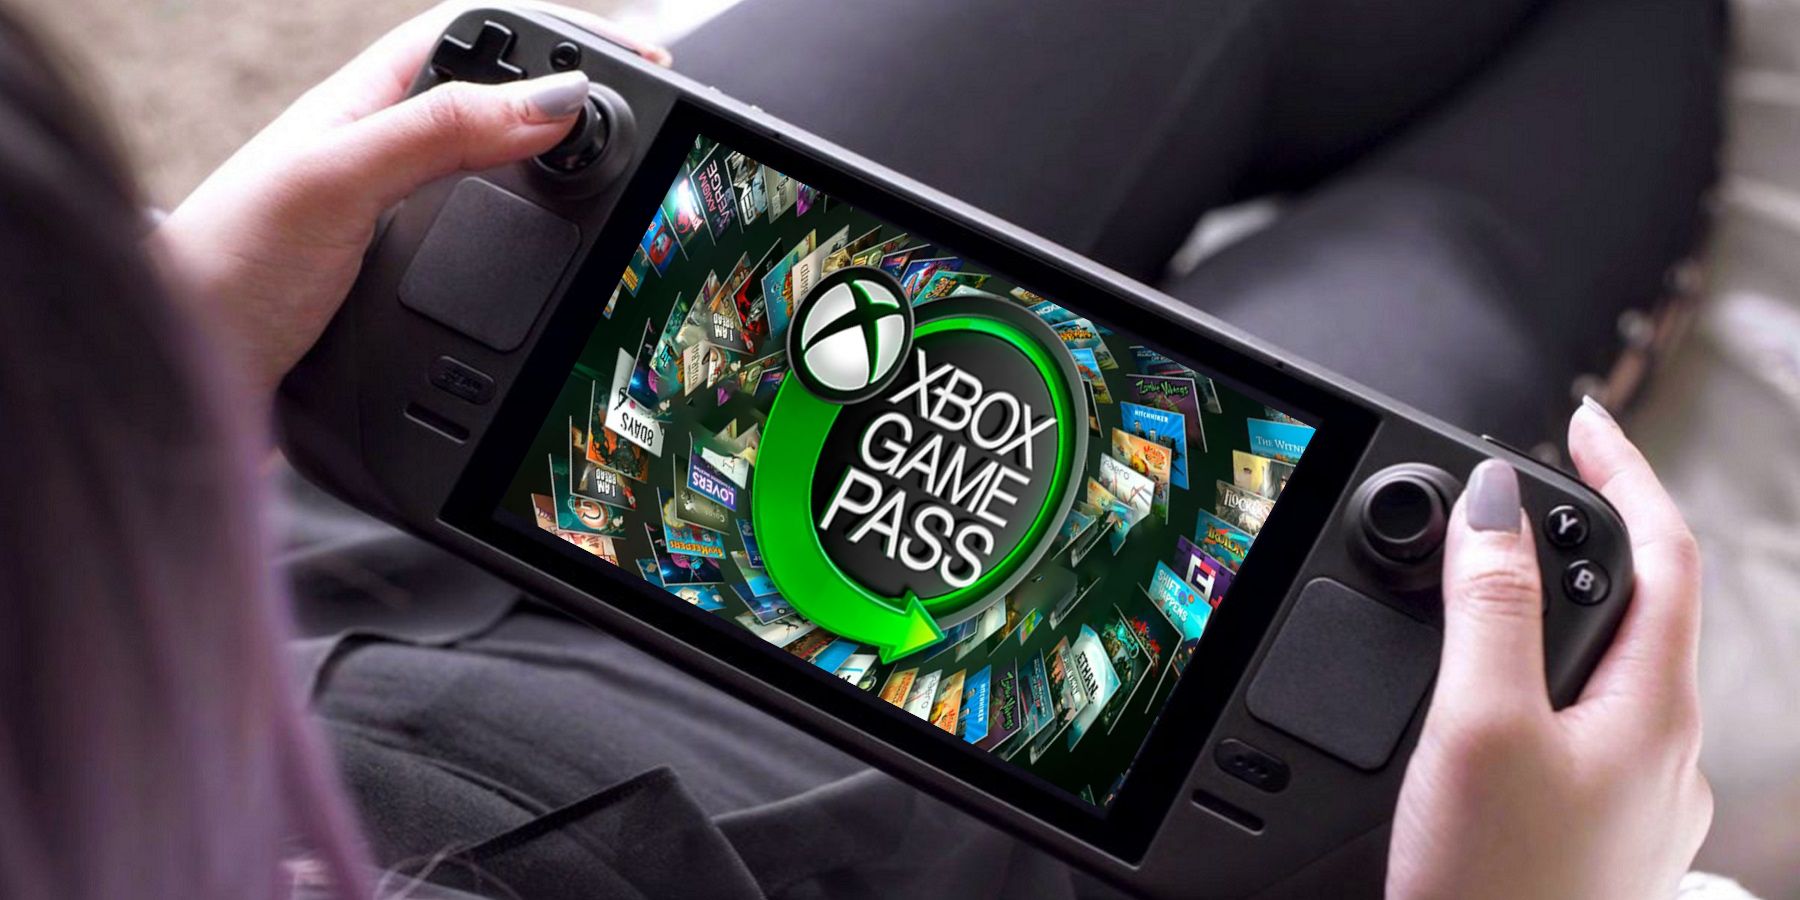 Image of a Steam Deck with the Xbox Game Pass logo on the screen.